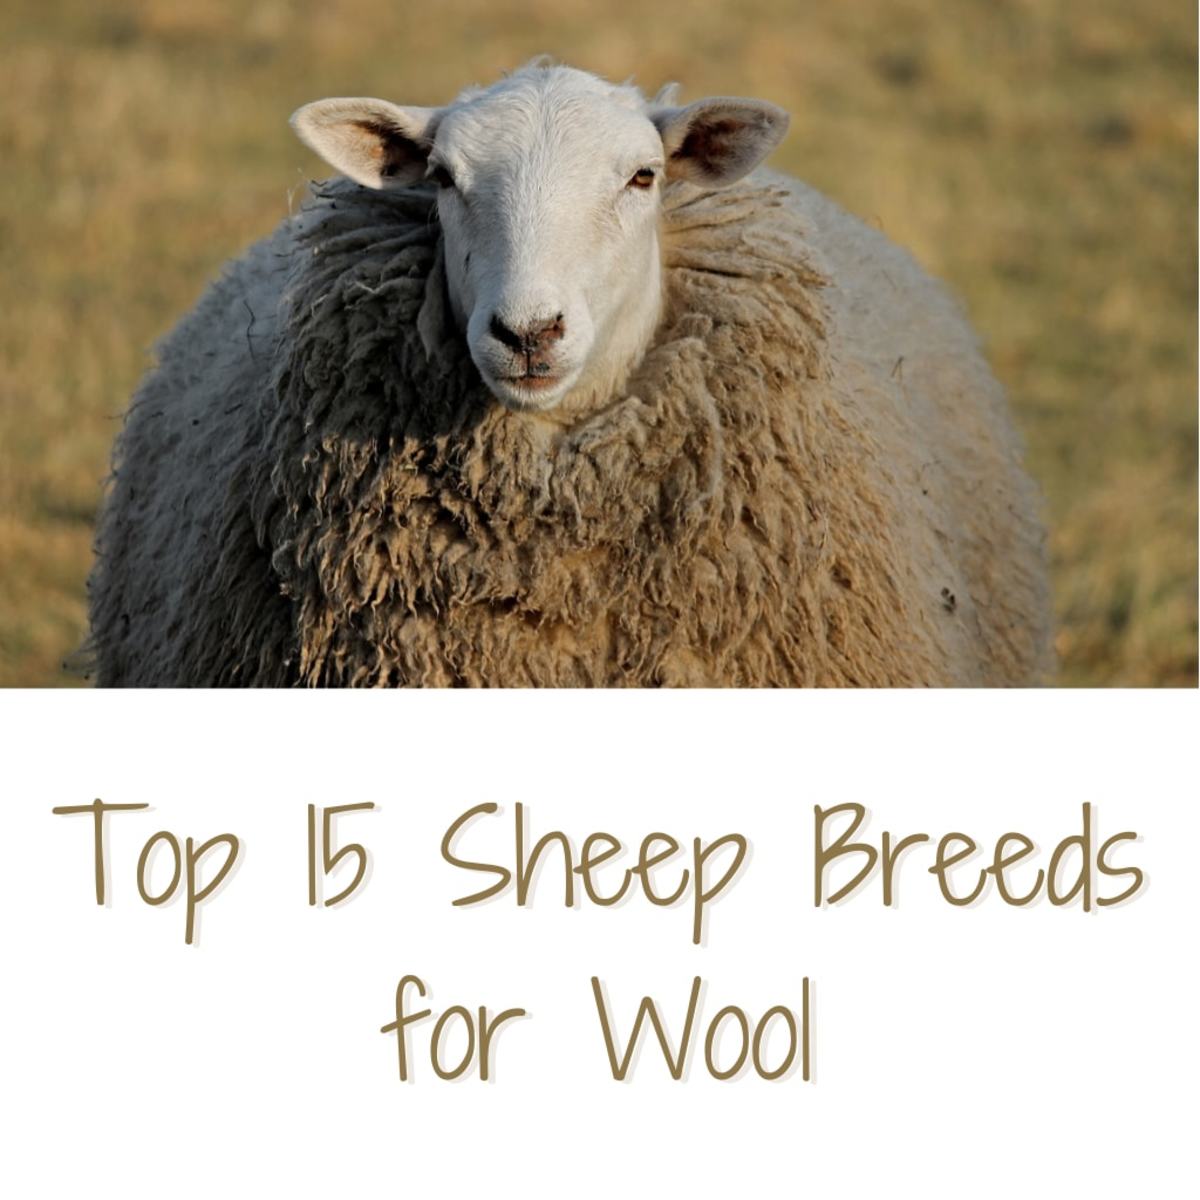 Top 15 Sheep Breeds for Wool - PetHelpful